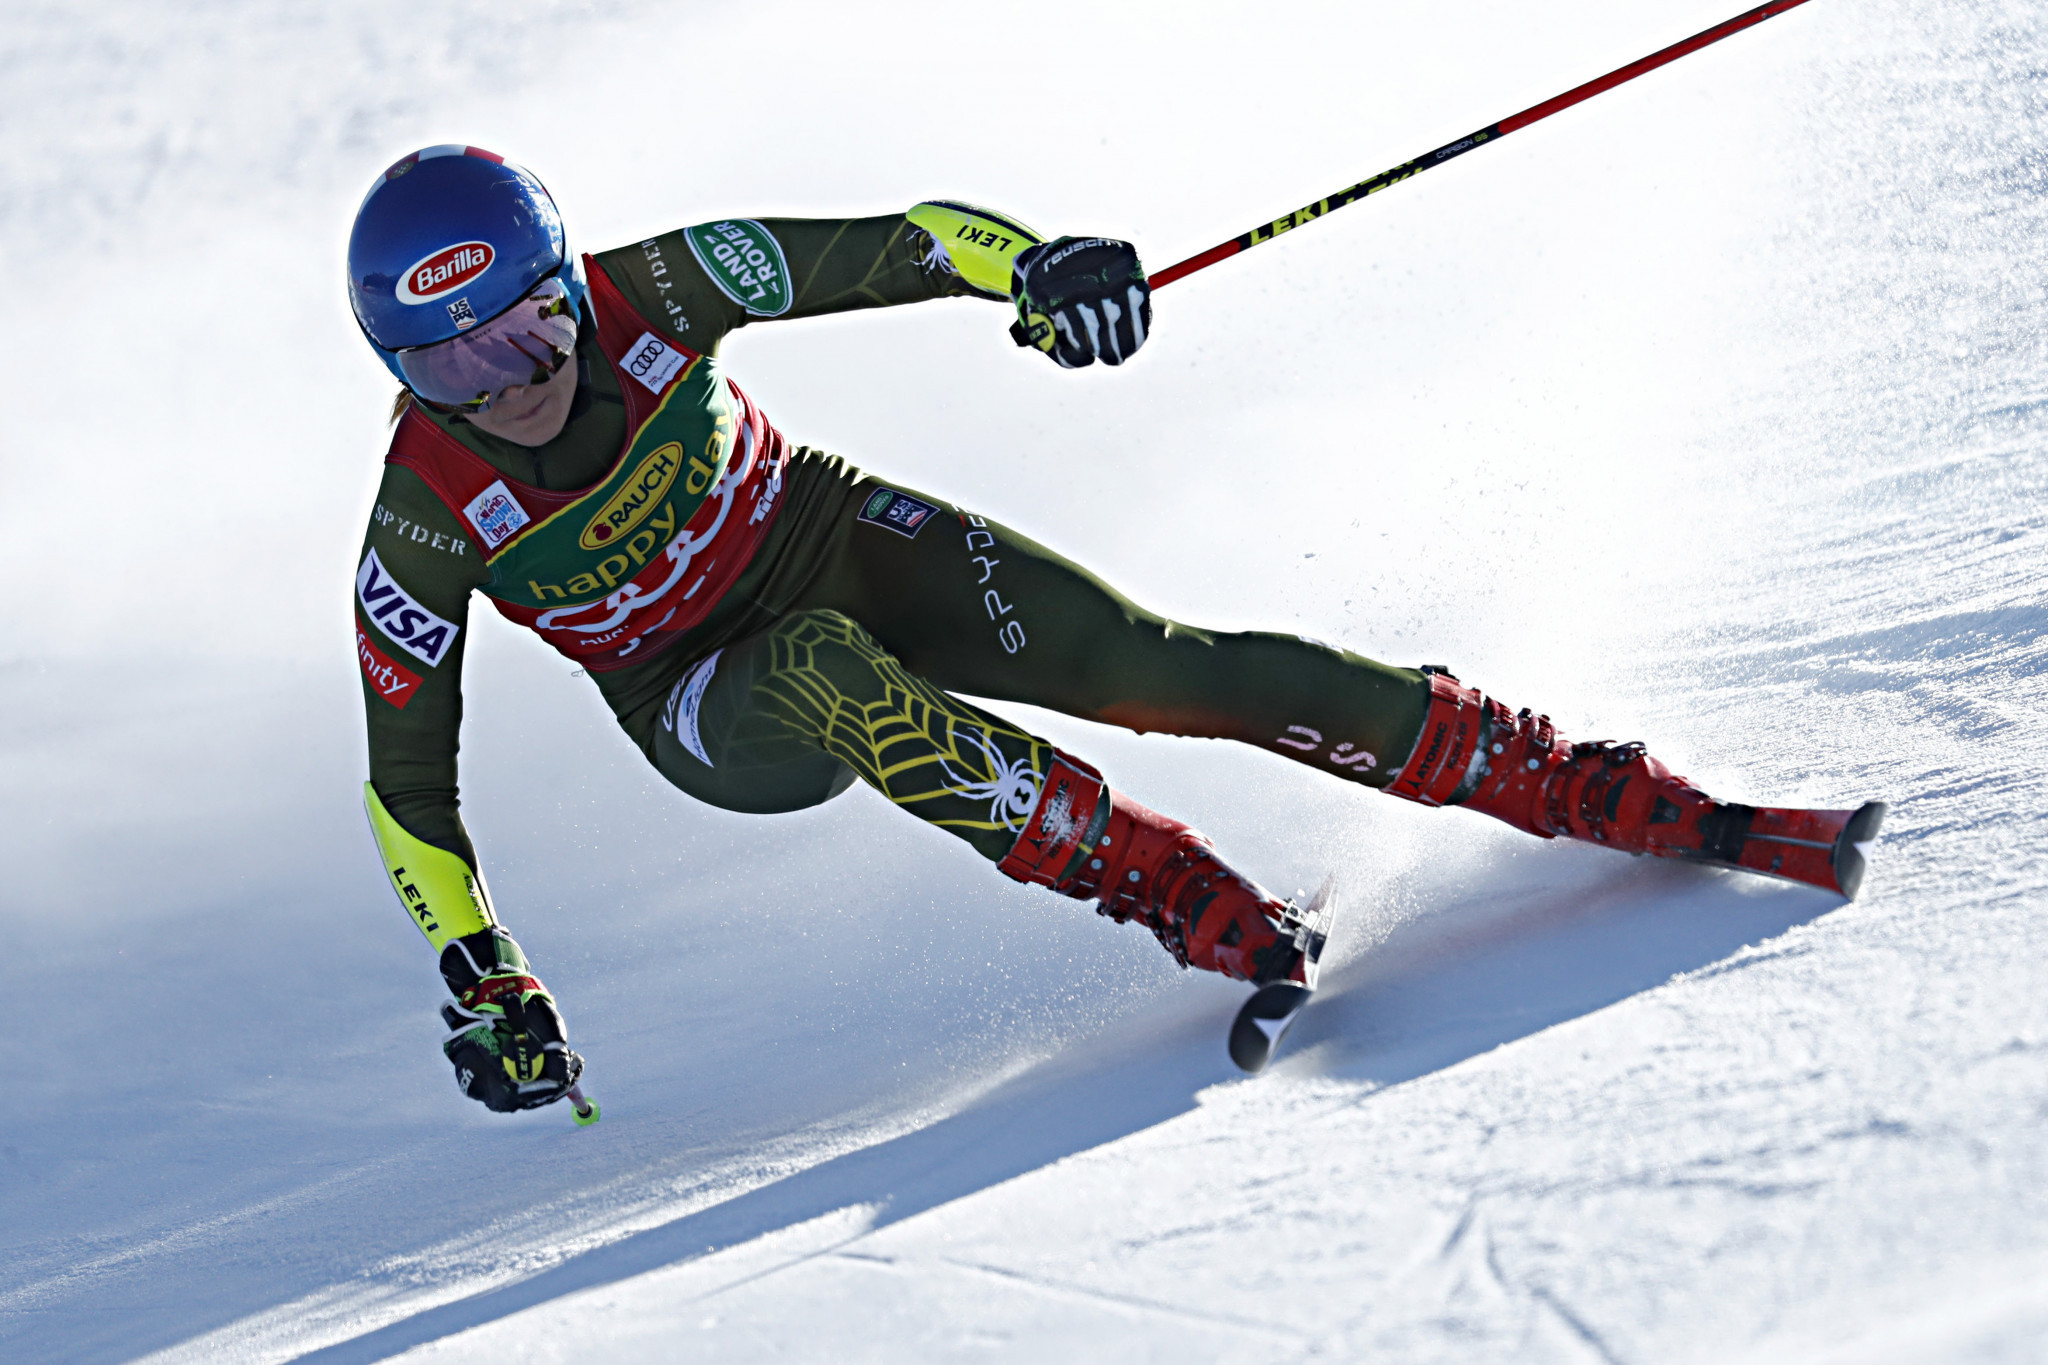 Levi to host opening slalom races of FIS Alpine Skiing World Cup season